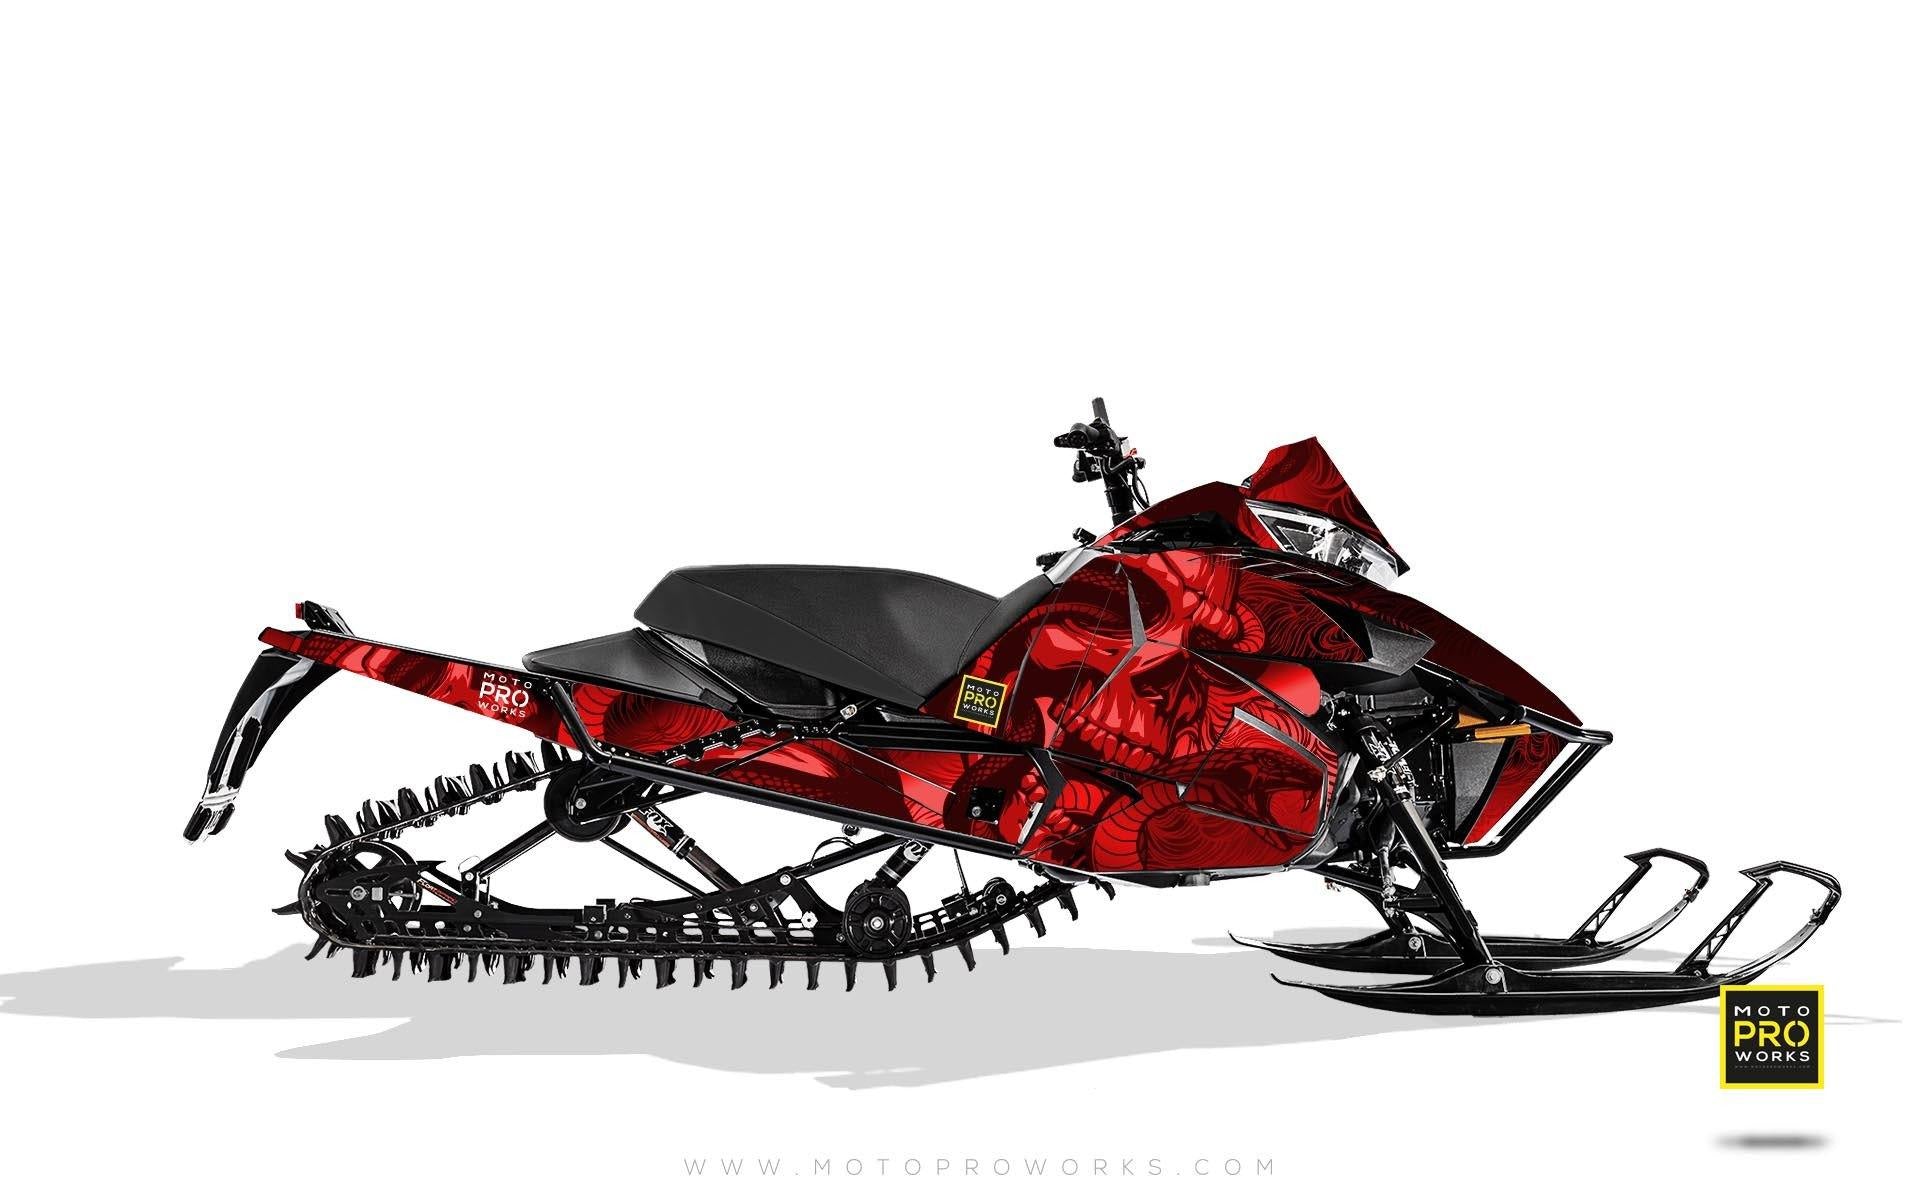 Arctic Cat Graphics - "Ssskully" (red) - MotoProWorks | Decals and Bike Graphic kit